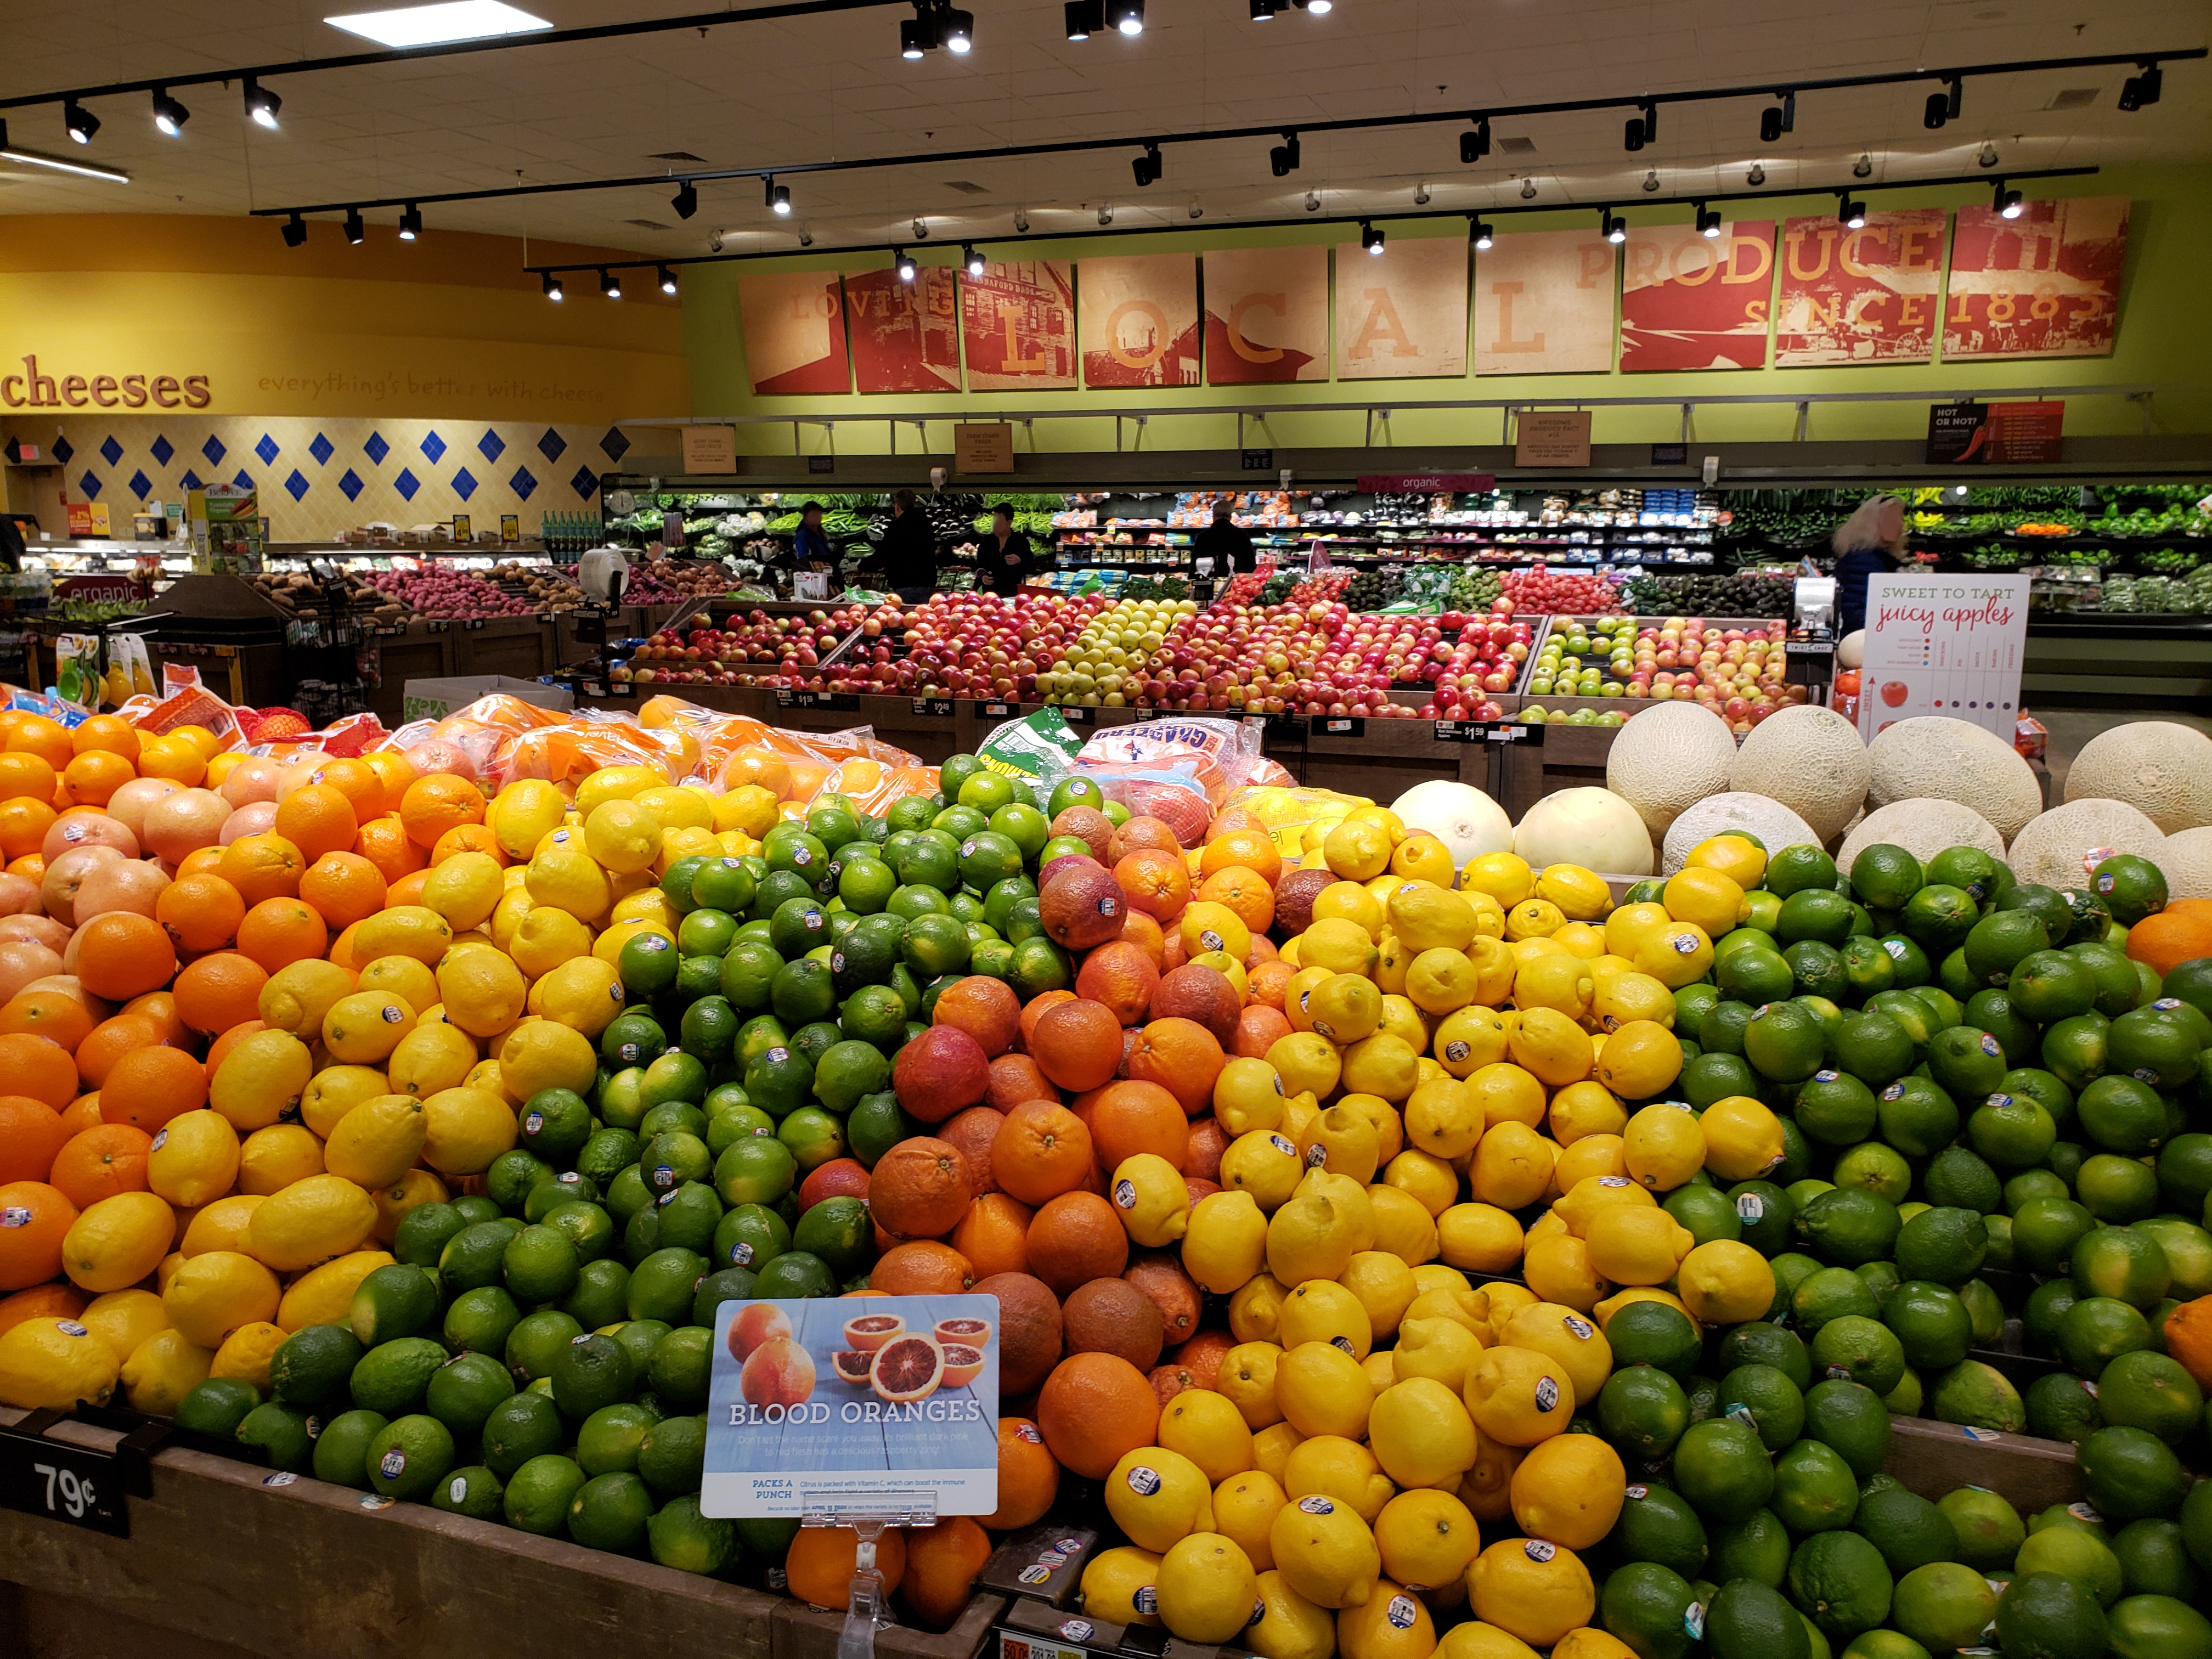 Hannaford produce section on Saturday, March 14th, 2020. All of the fruits and vegetables were restocked. But many shelf stable food items were not.